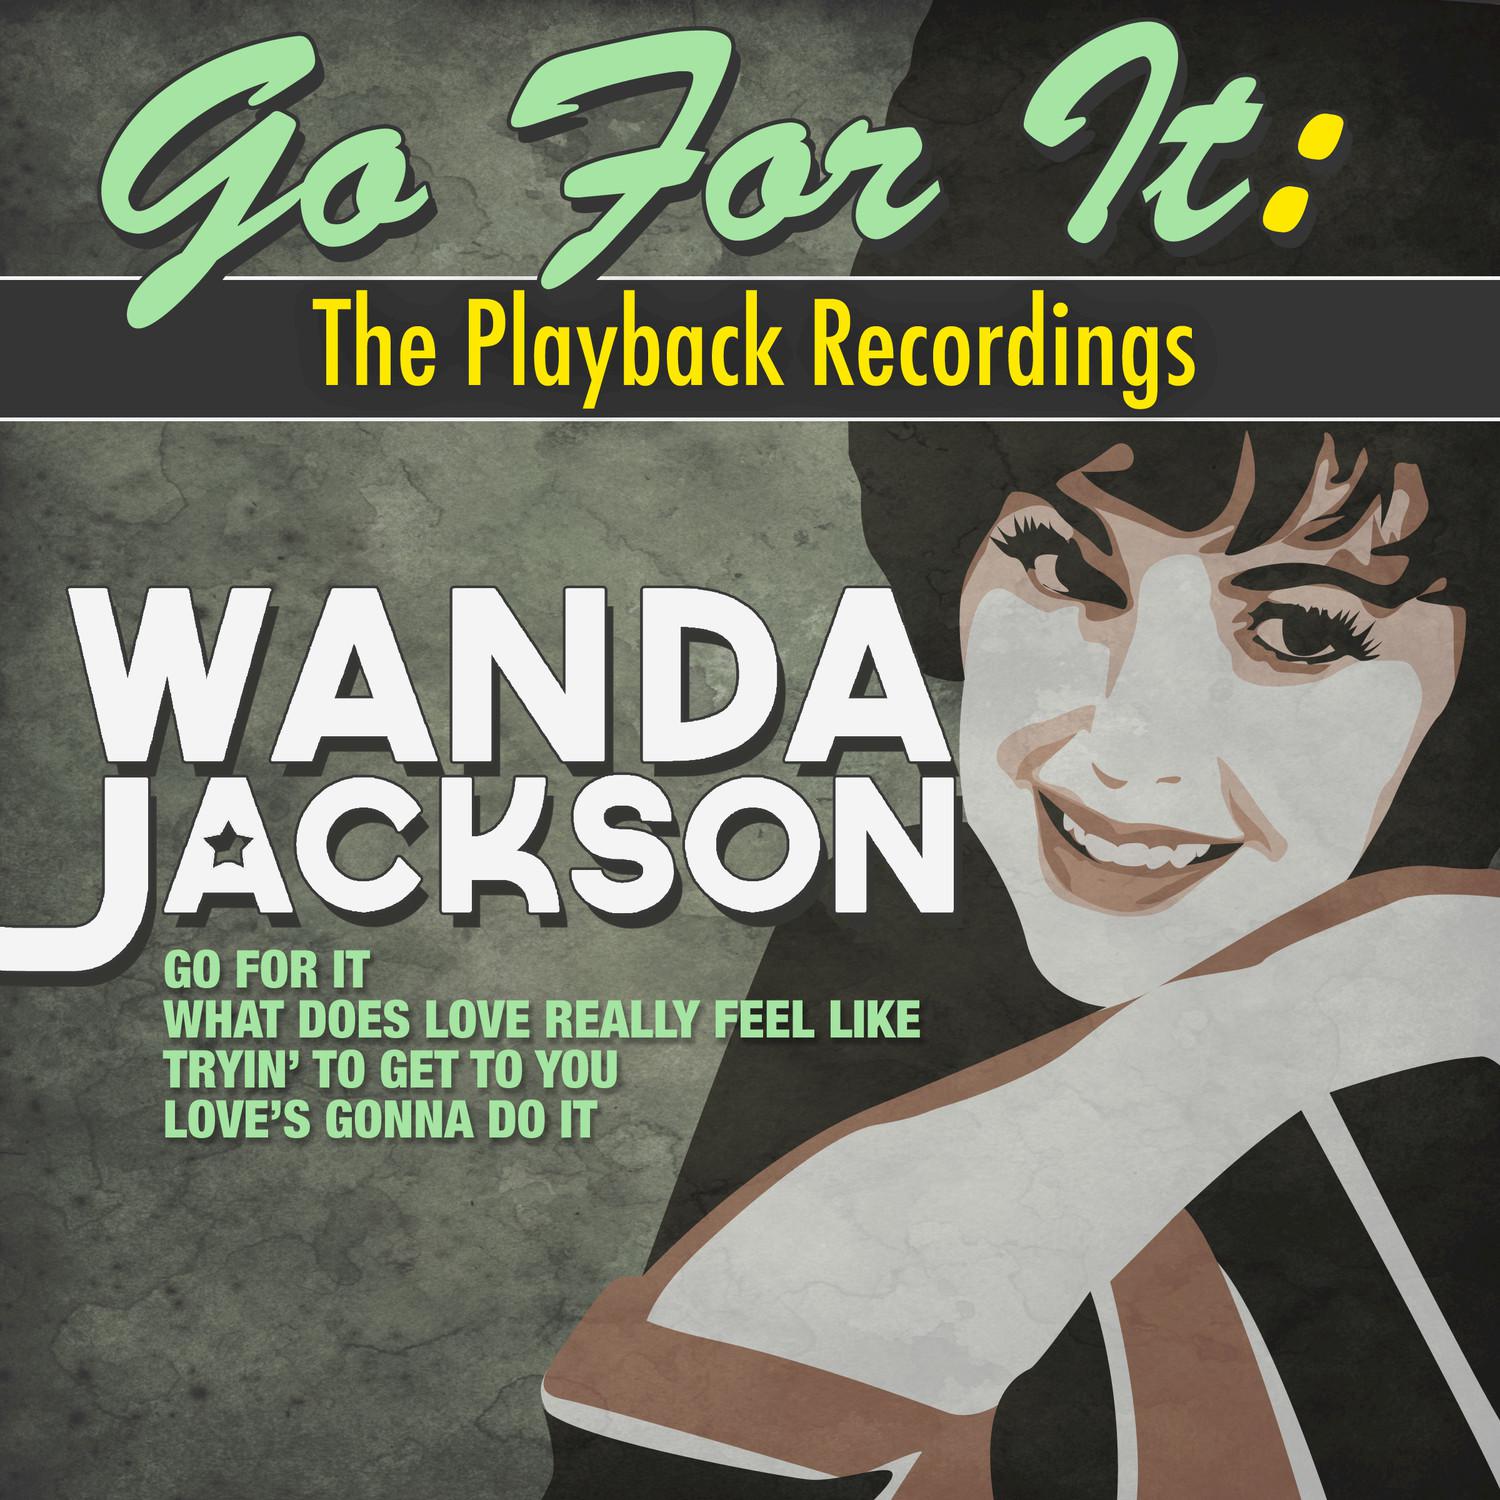 Go for It: The Playback Recordings